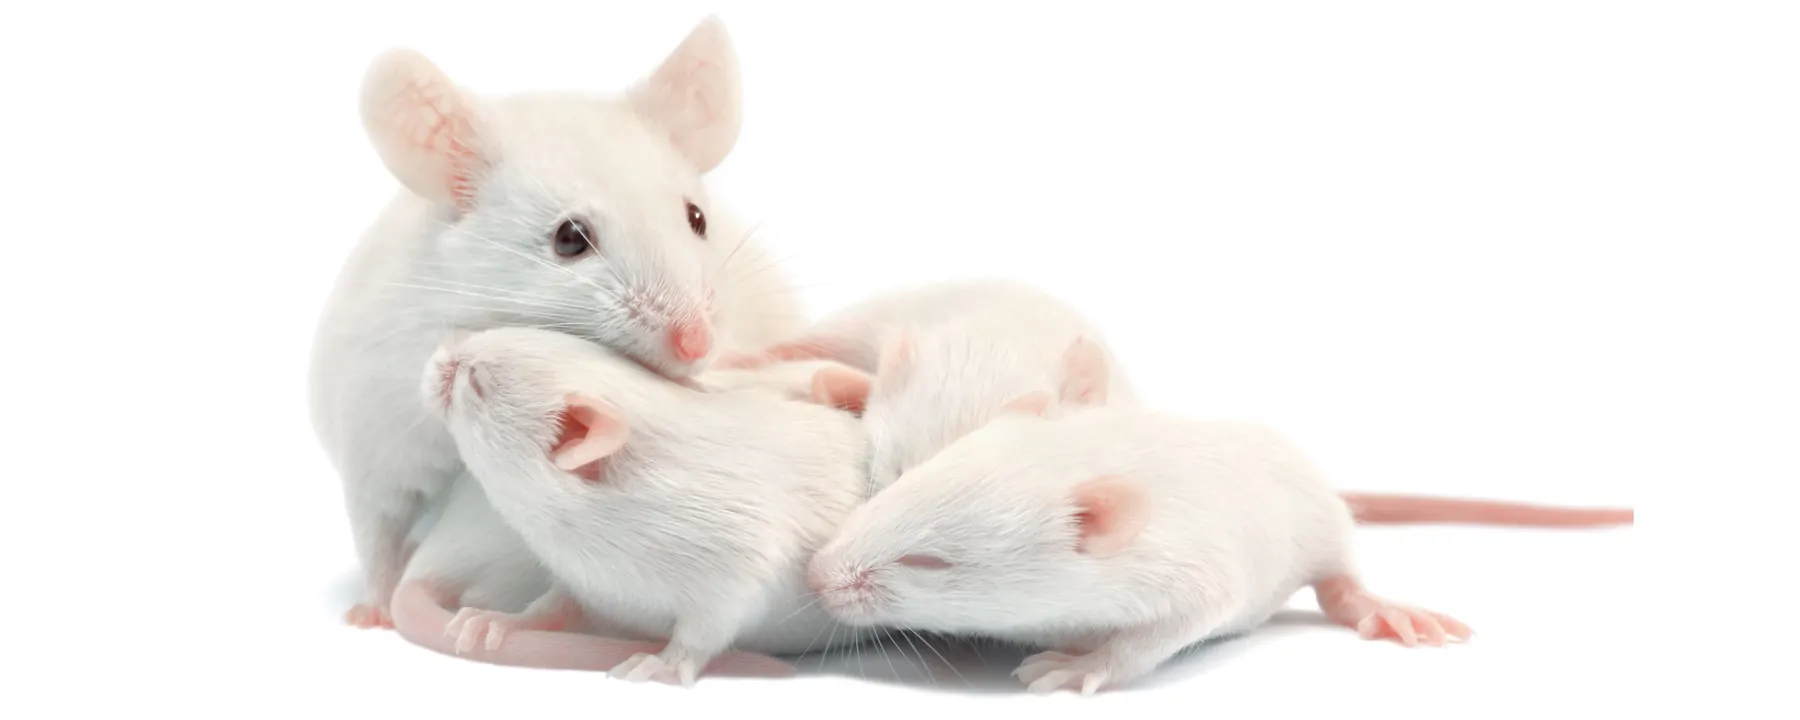 In Vivo Gene Therapy Cures Infertility in Mice